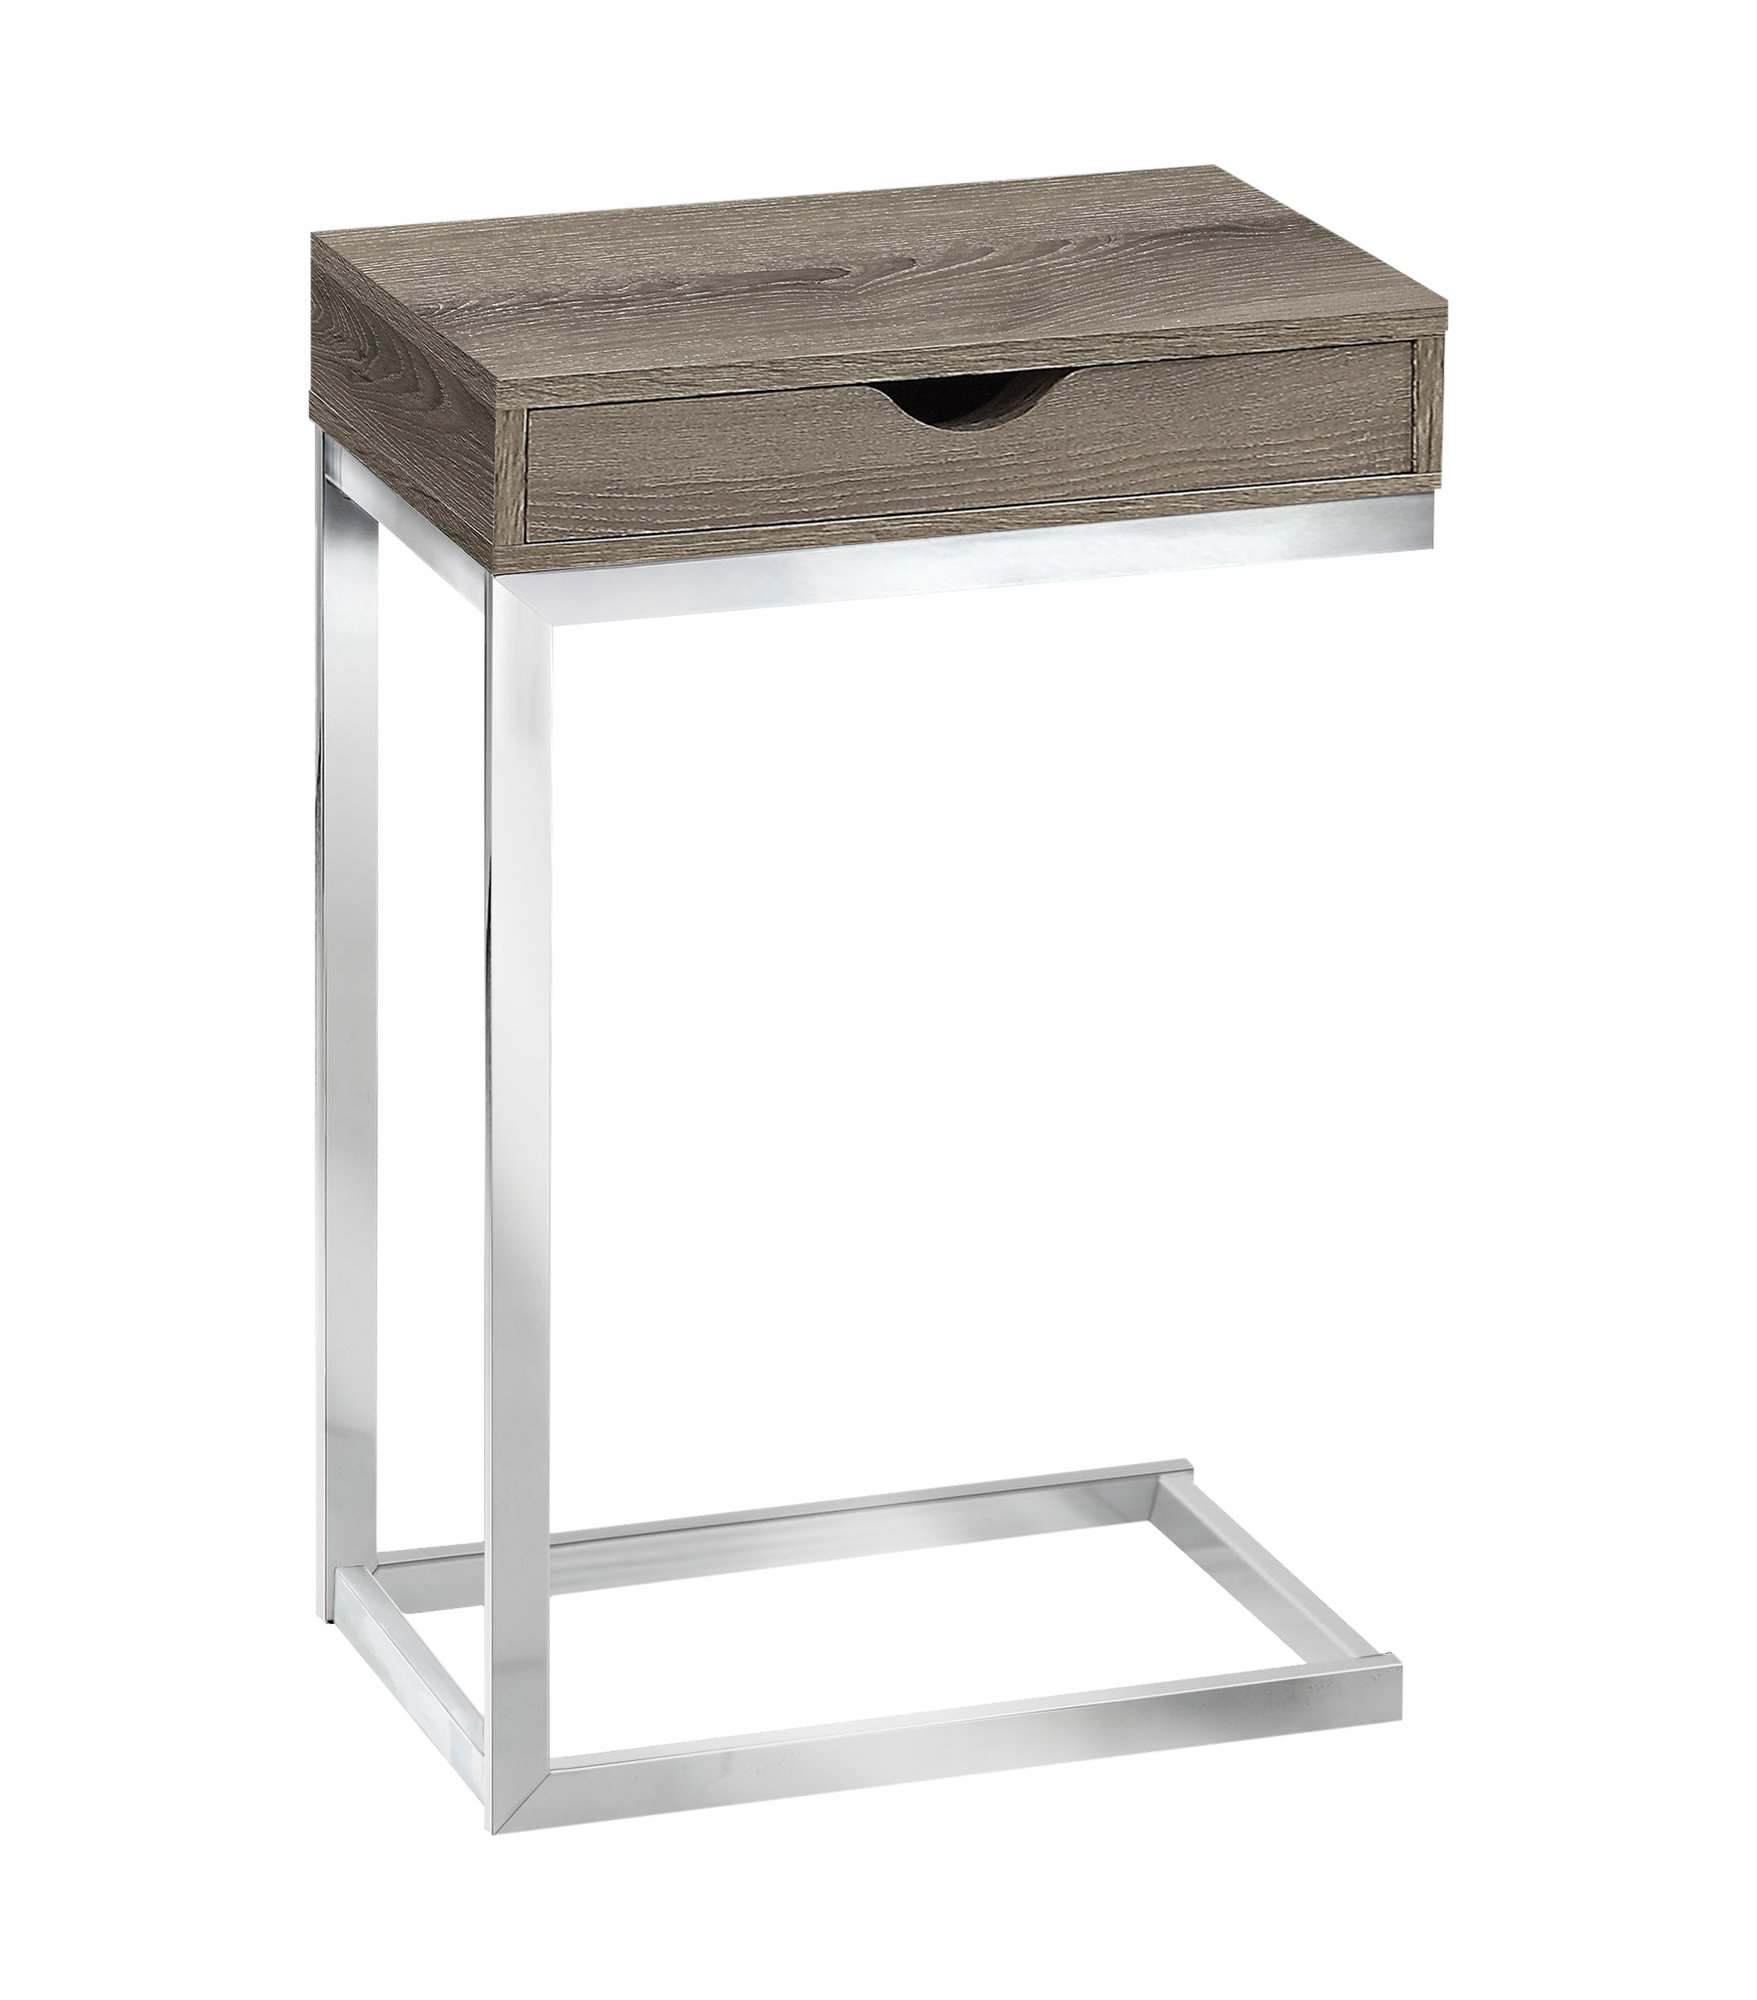 ACCENT TABLE - CHROME METAL / DARK TAUPE WITH A DRAWER